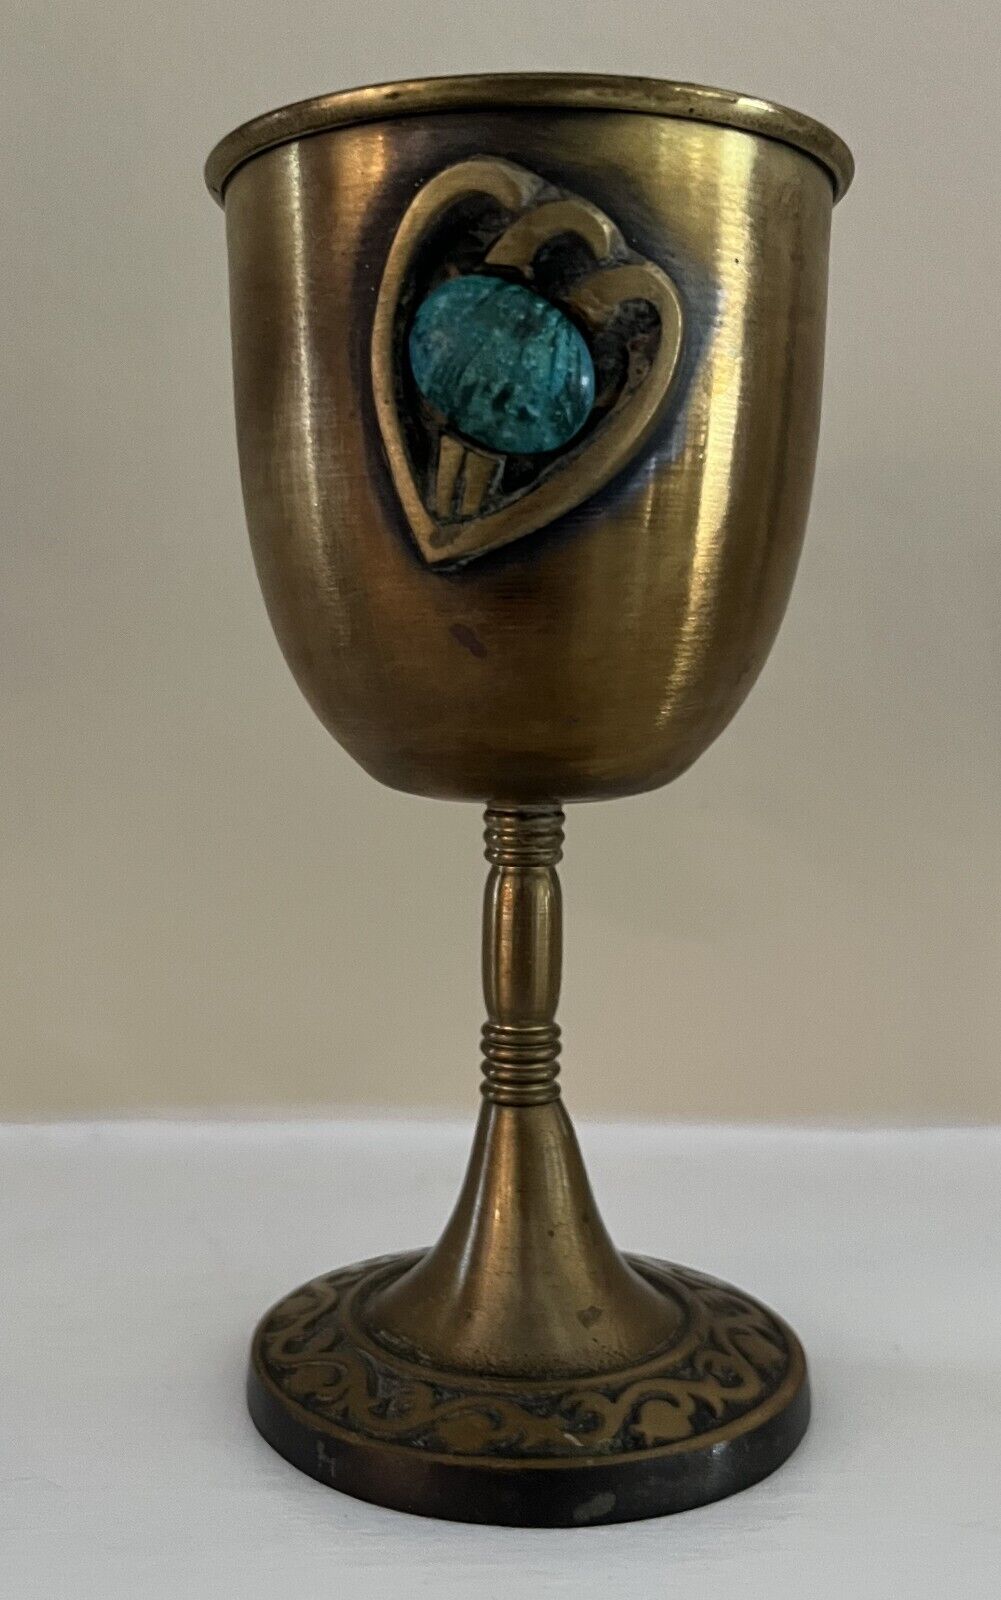 Vintage Brass Jewish Kiddush Cup with Turquoise embelishment